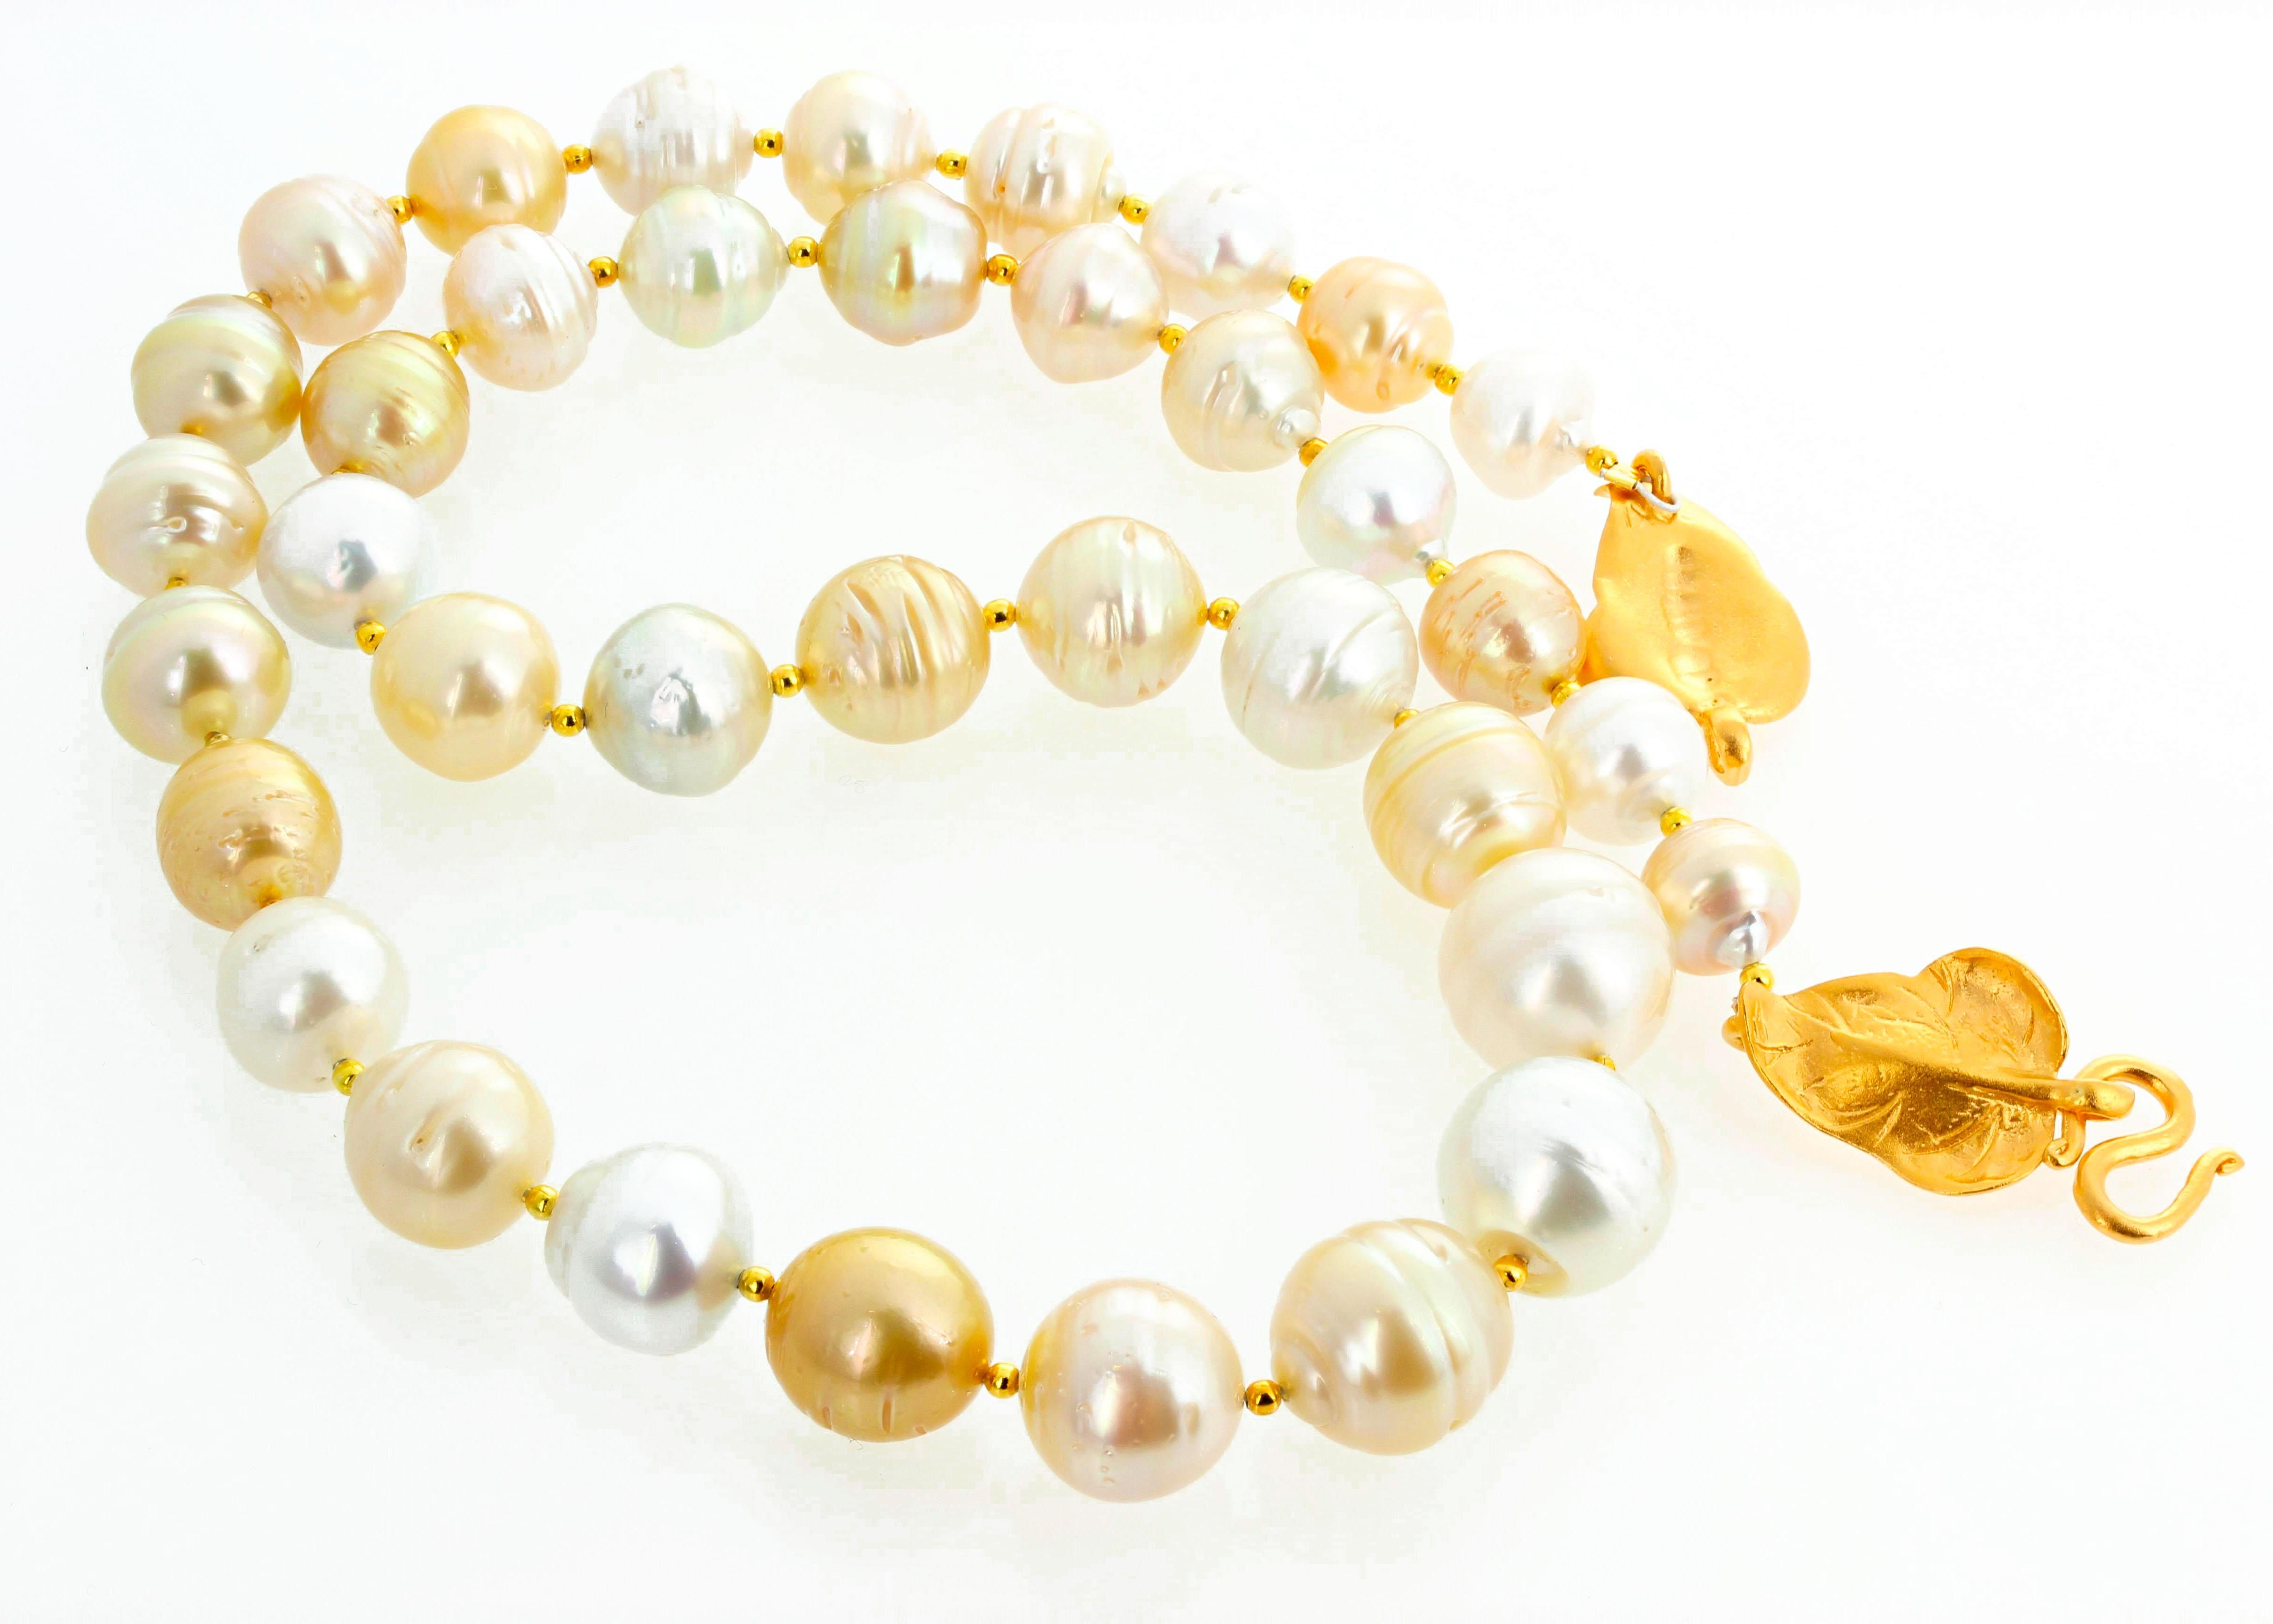 Mixed Cut AJD South Sea Shimmering Elegant Real Cultured Pearls w/ Vermeil Gold Clasp For Sale